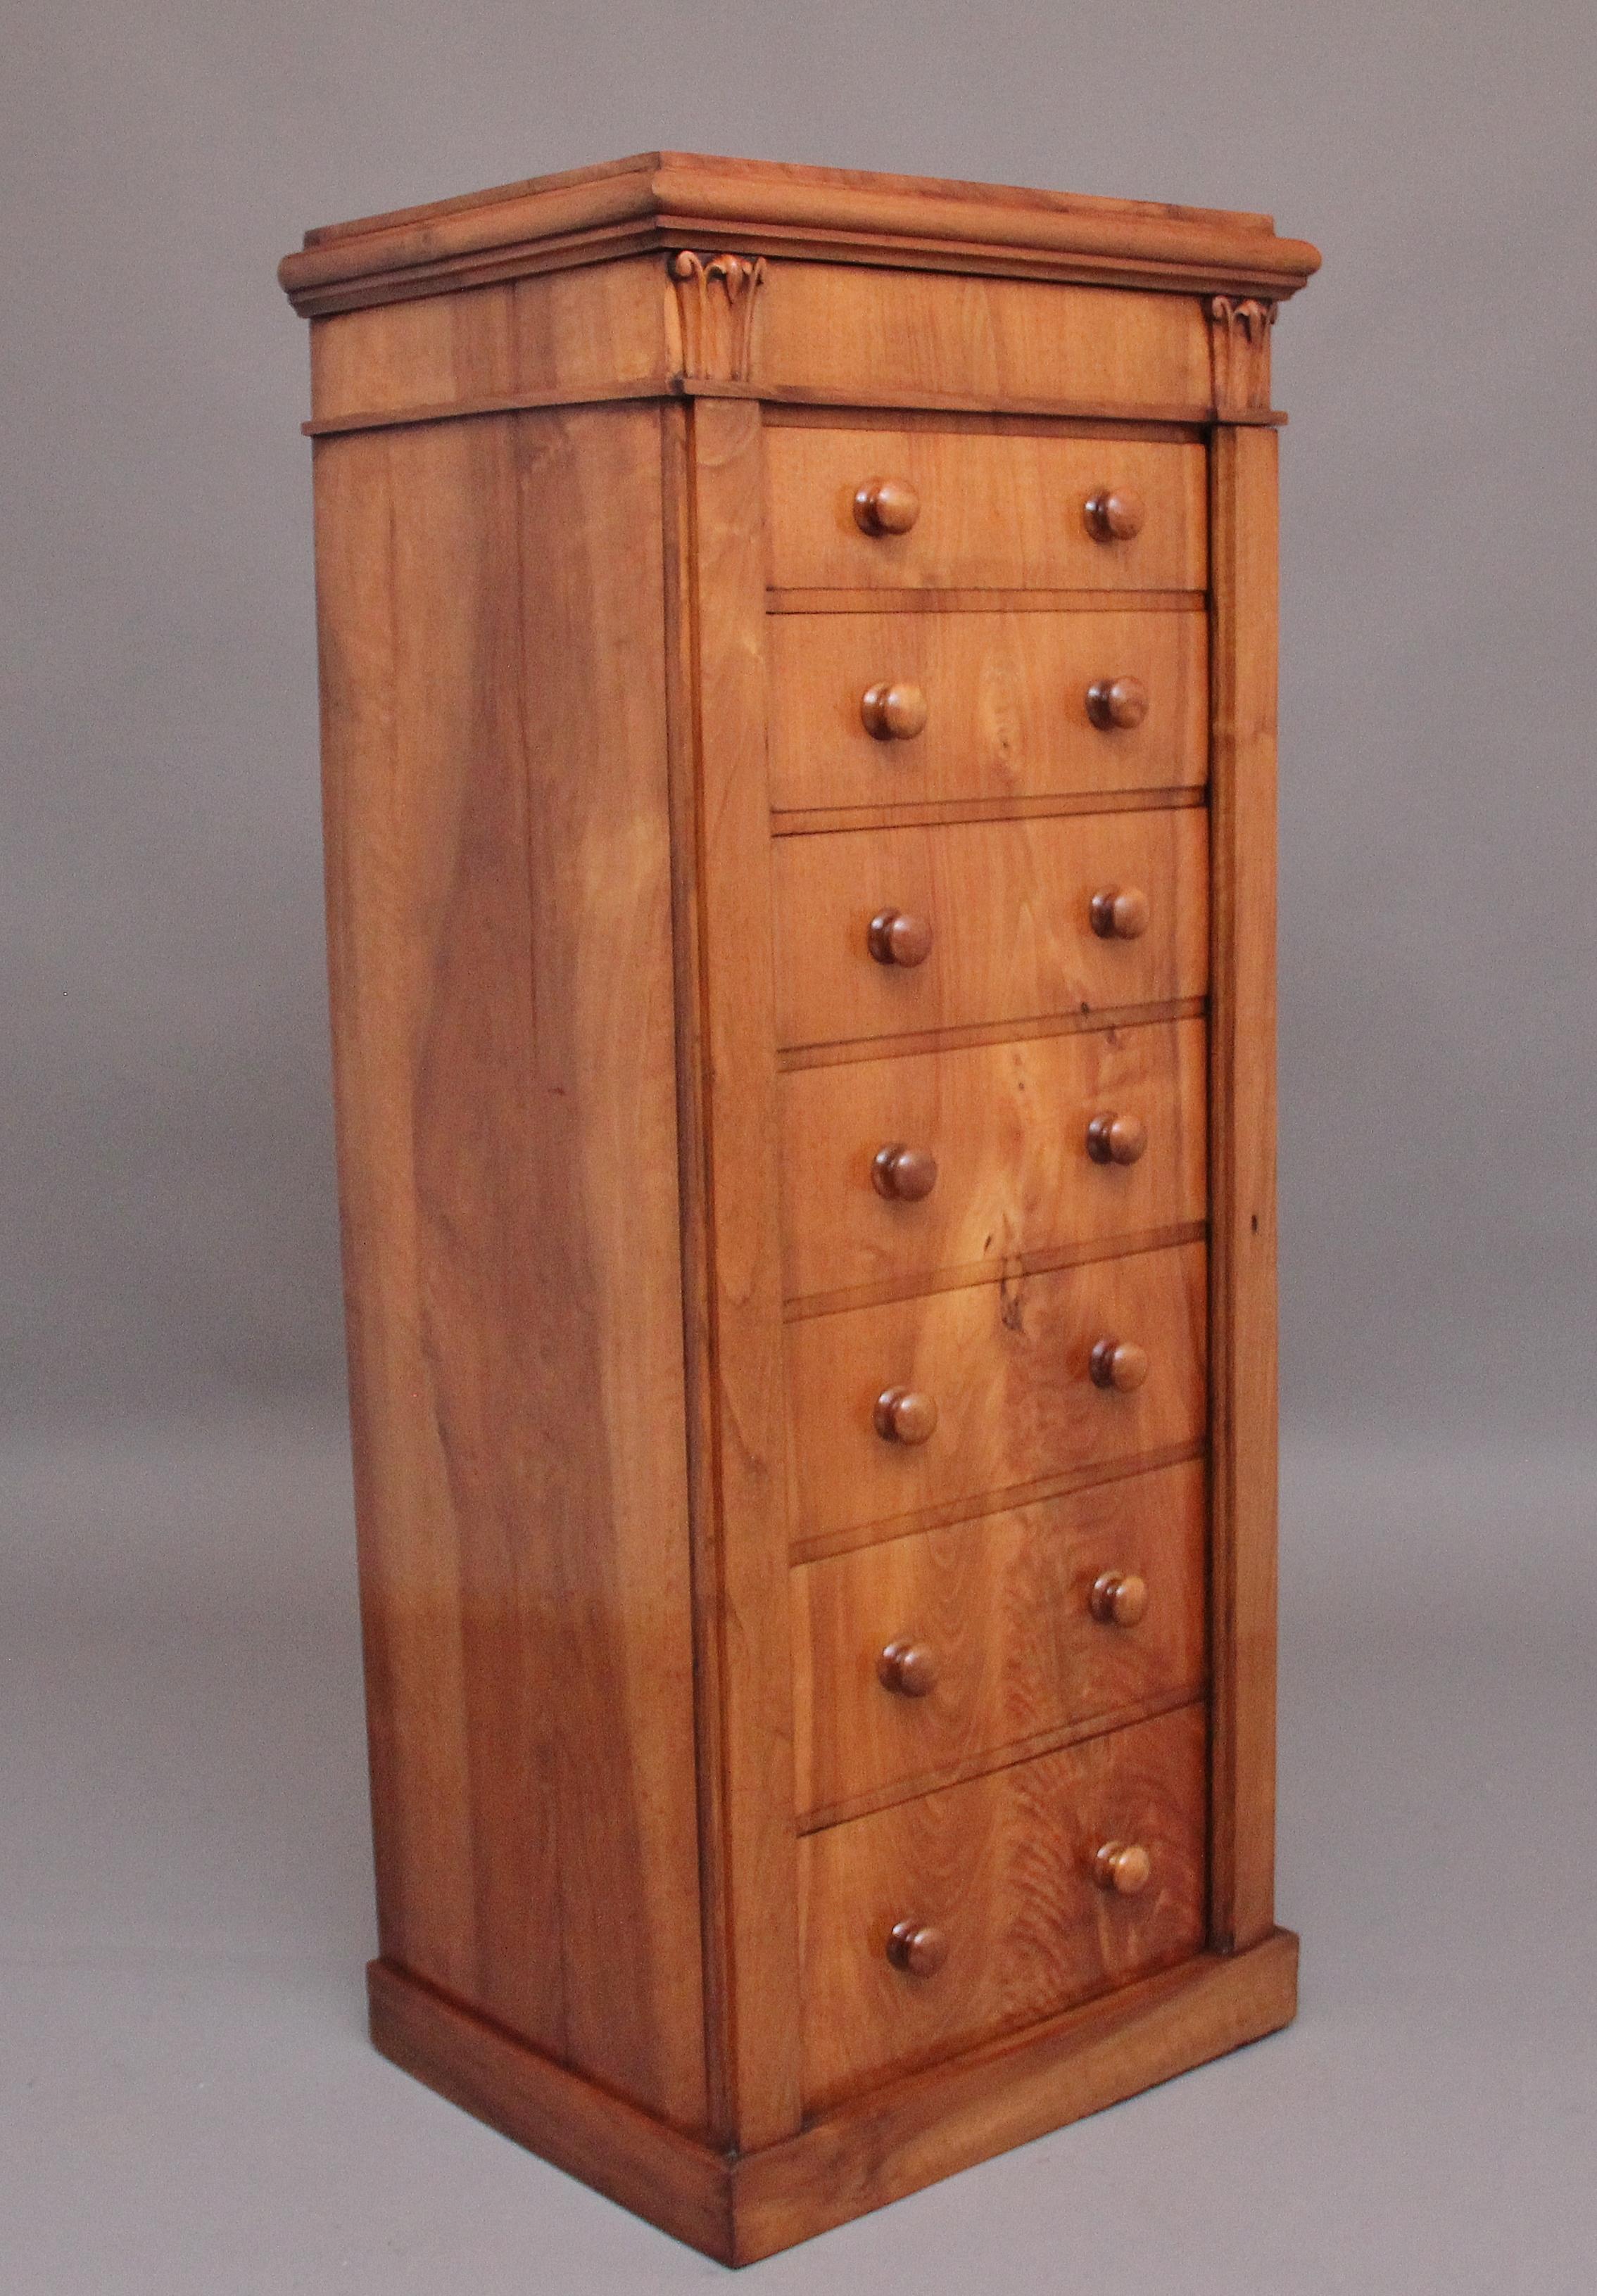 Early 19th Century antique Regency walnut Wellington chest, having a nice figured top sitting above a shaped cornice, the hinged top lifts up to reveal a spacious compartment space, carved tulip decoration underneath either side, a selection of